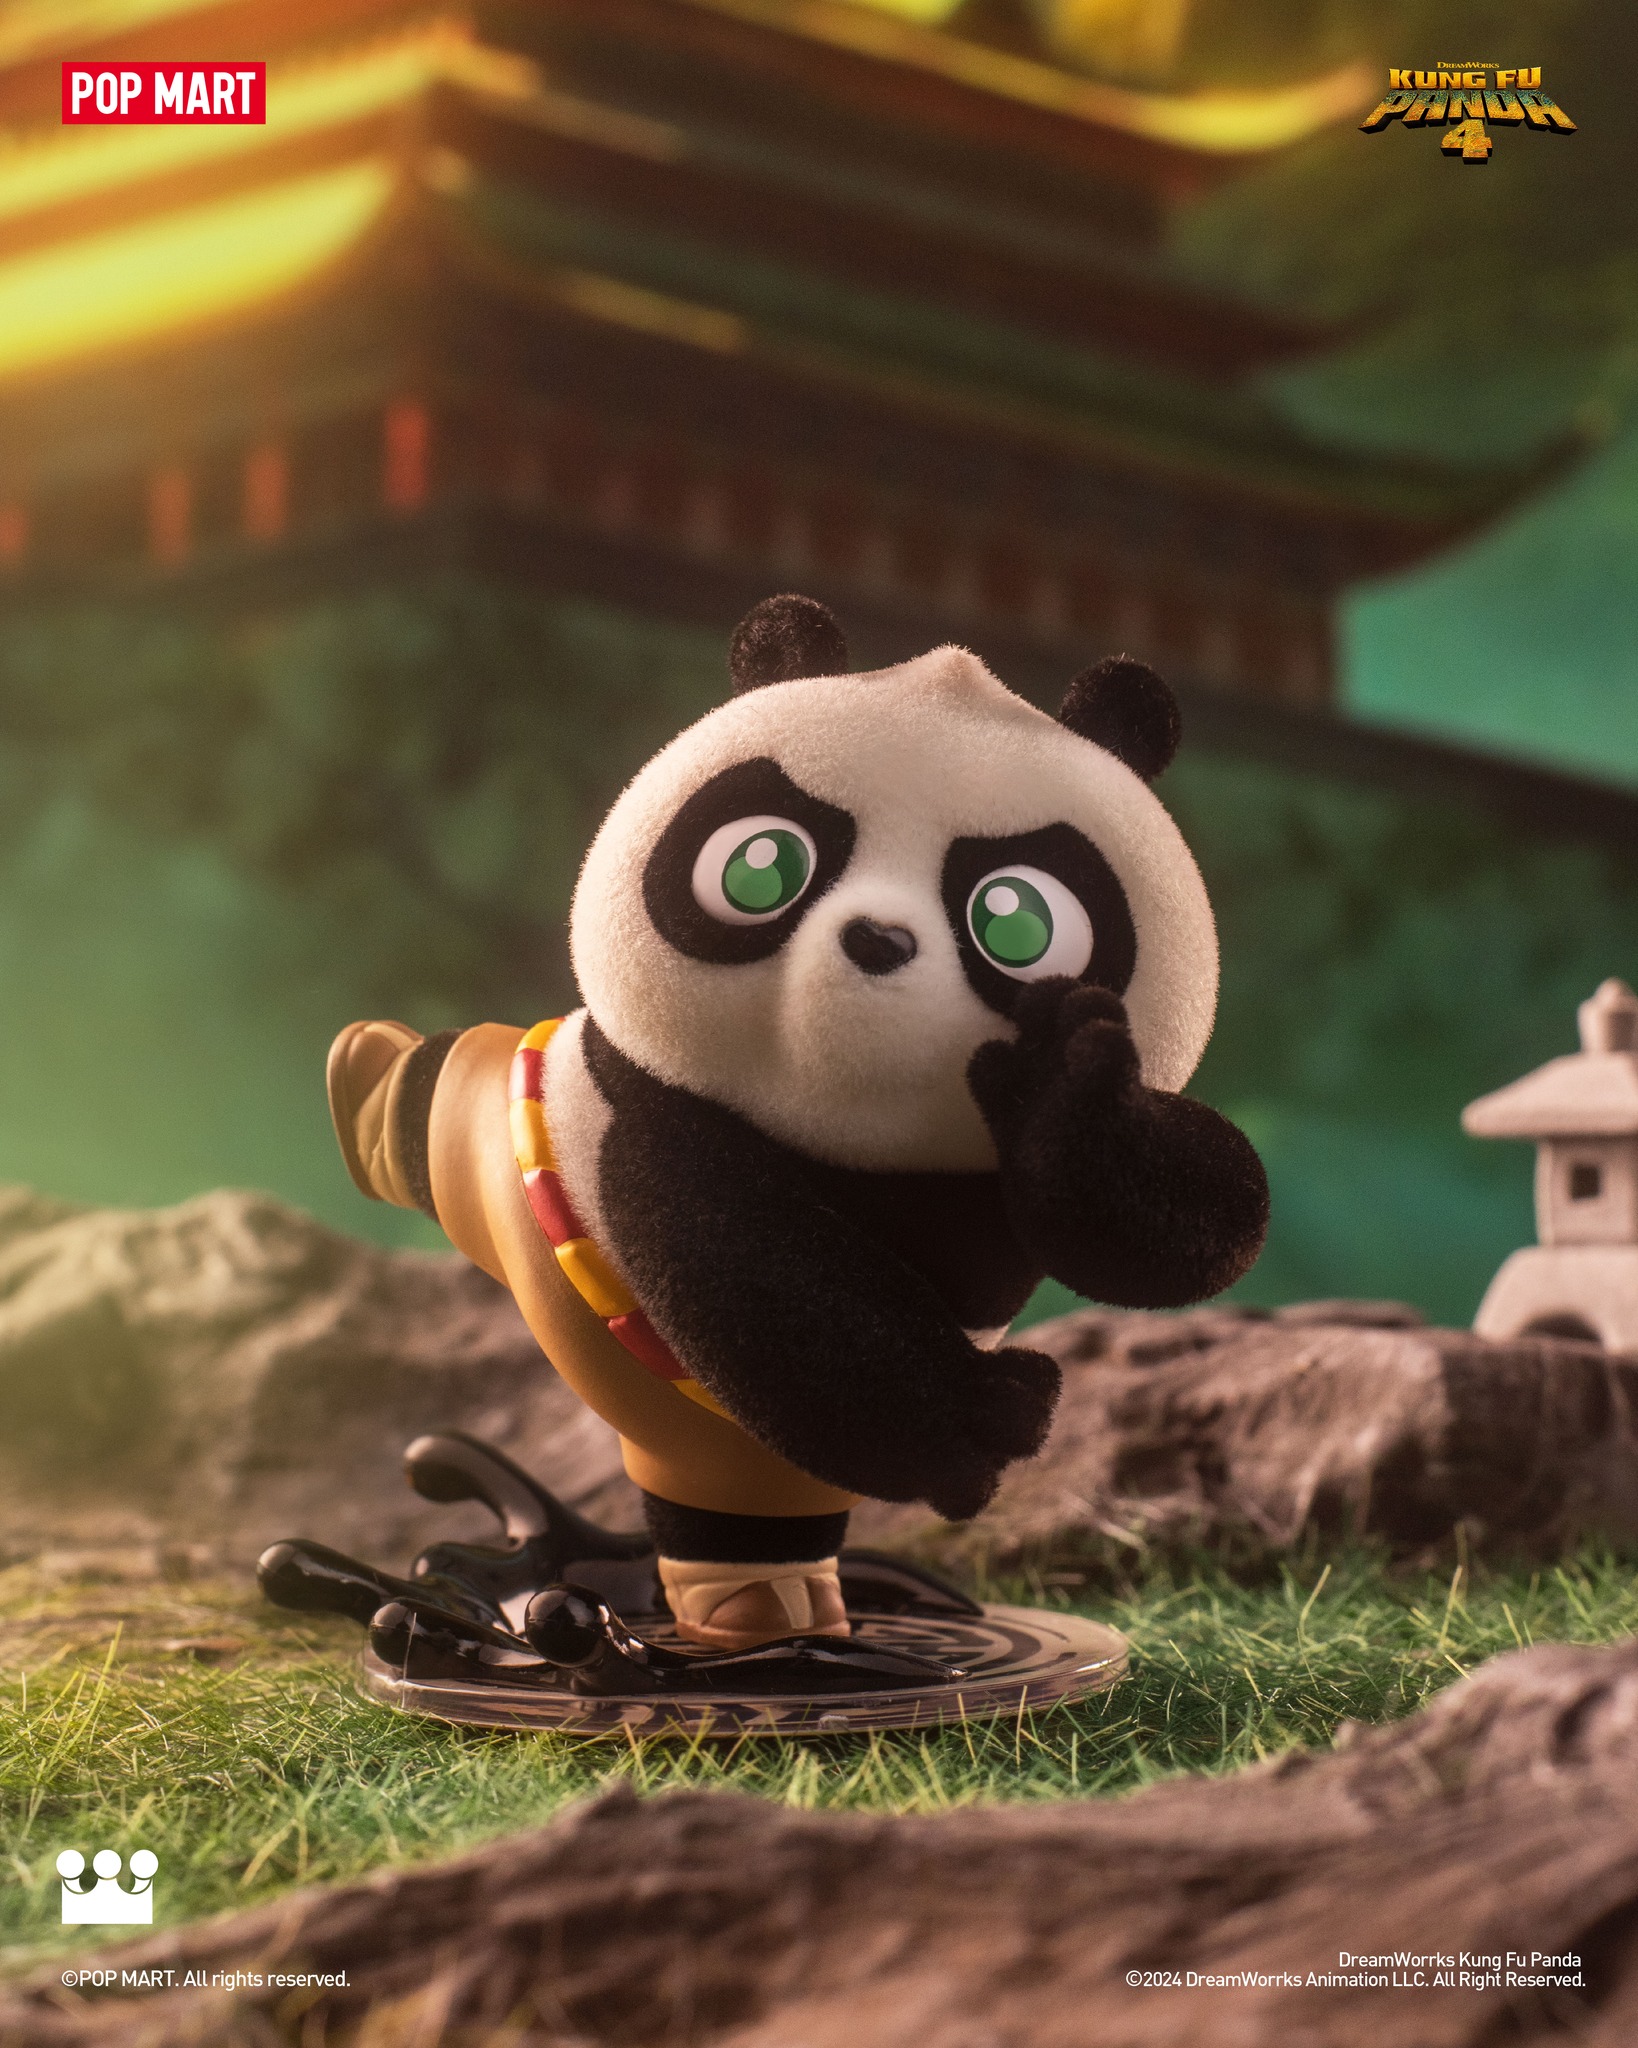 Download kung fu panda wallpaper by bororulz - a8 - Free on ZEDGE™ now.  Browse millions of popular hd… | Panda wallpaper iphone, Panda wallpapers,  Cartoon wallpaper